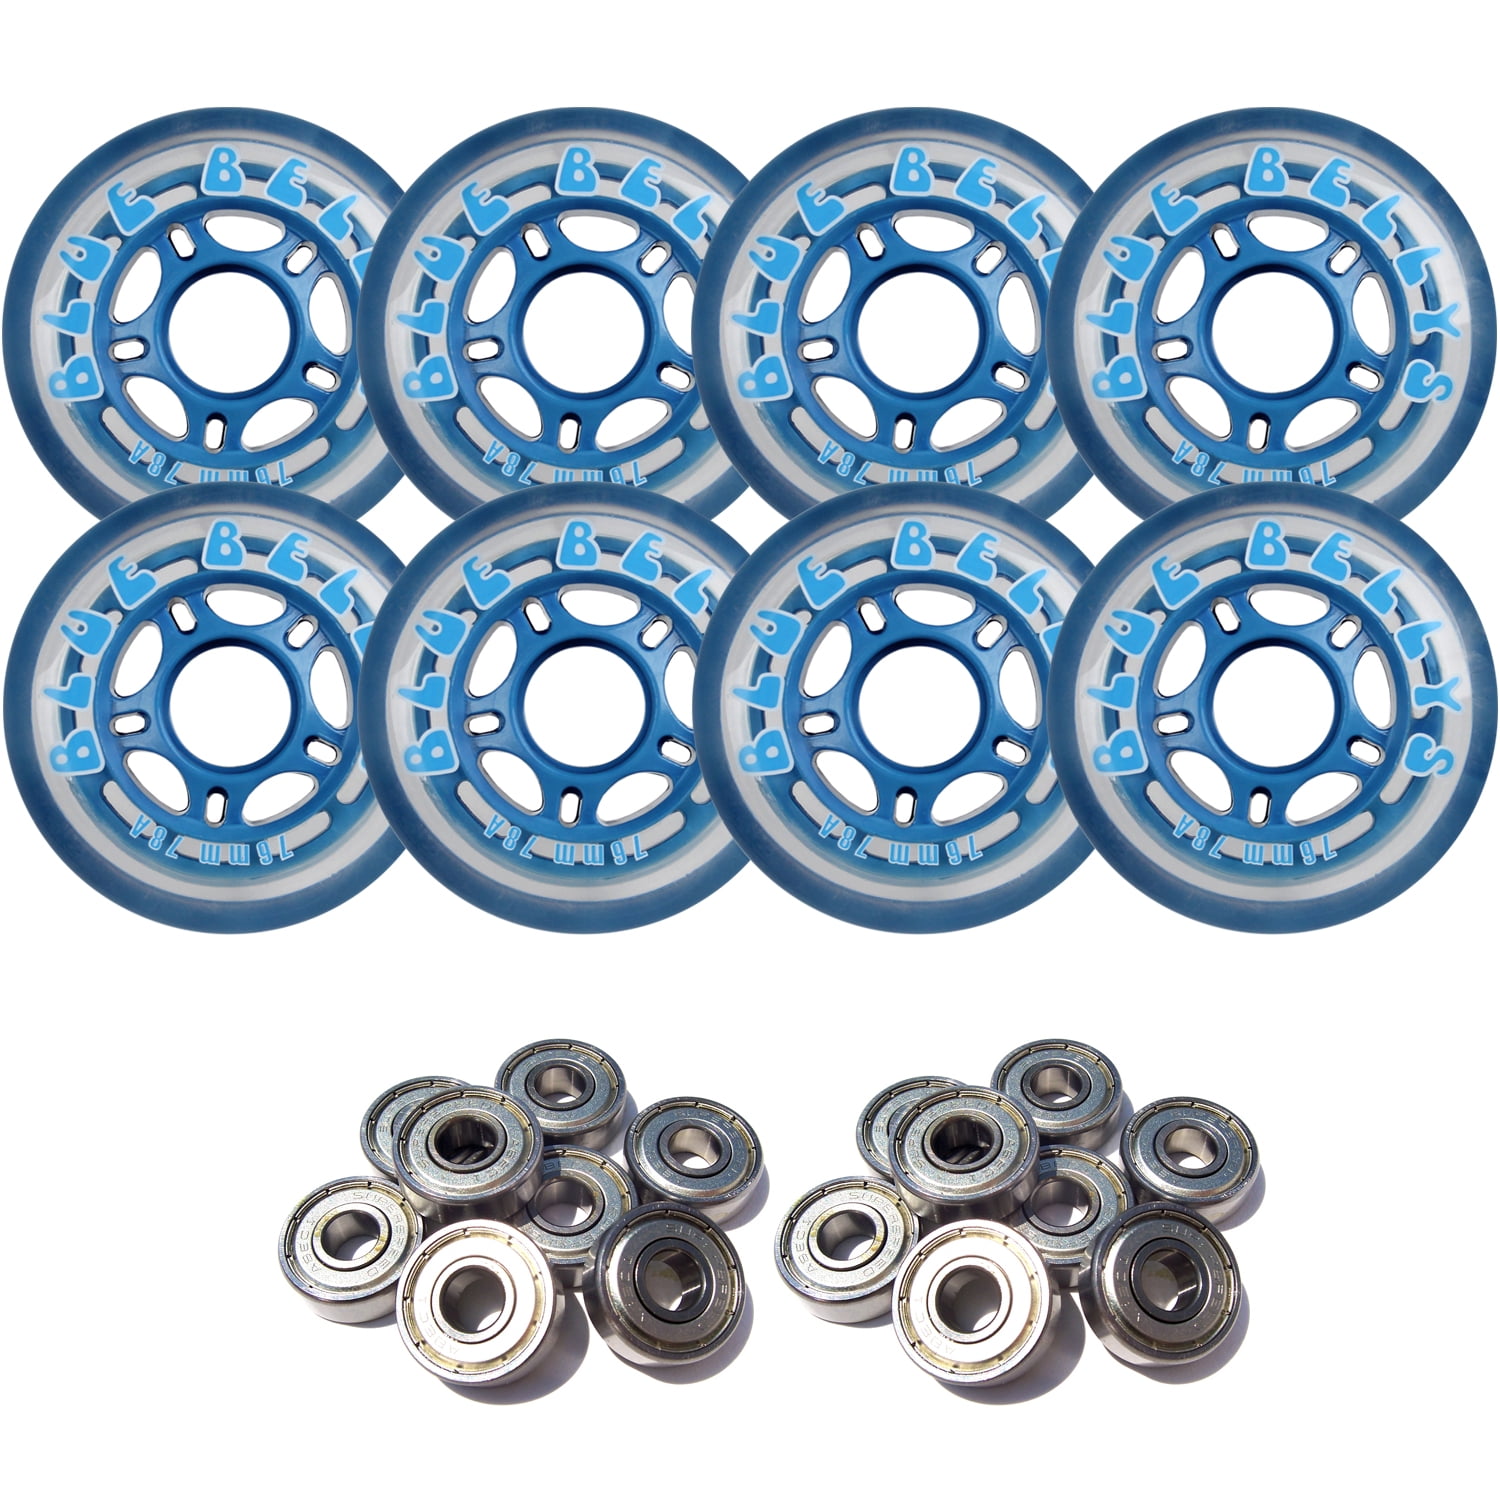 BLUE BELLYS 76mm 78a Roller Inline Skate Wheels with ABEC 5 BEARINGS